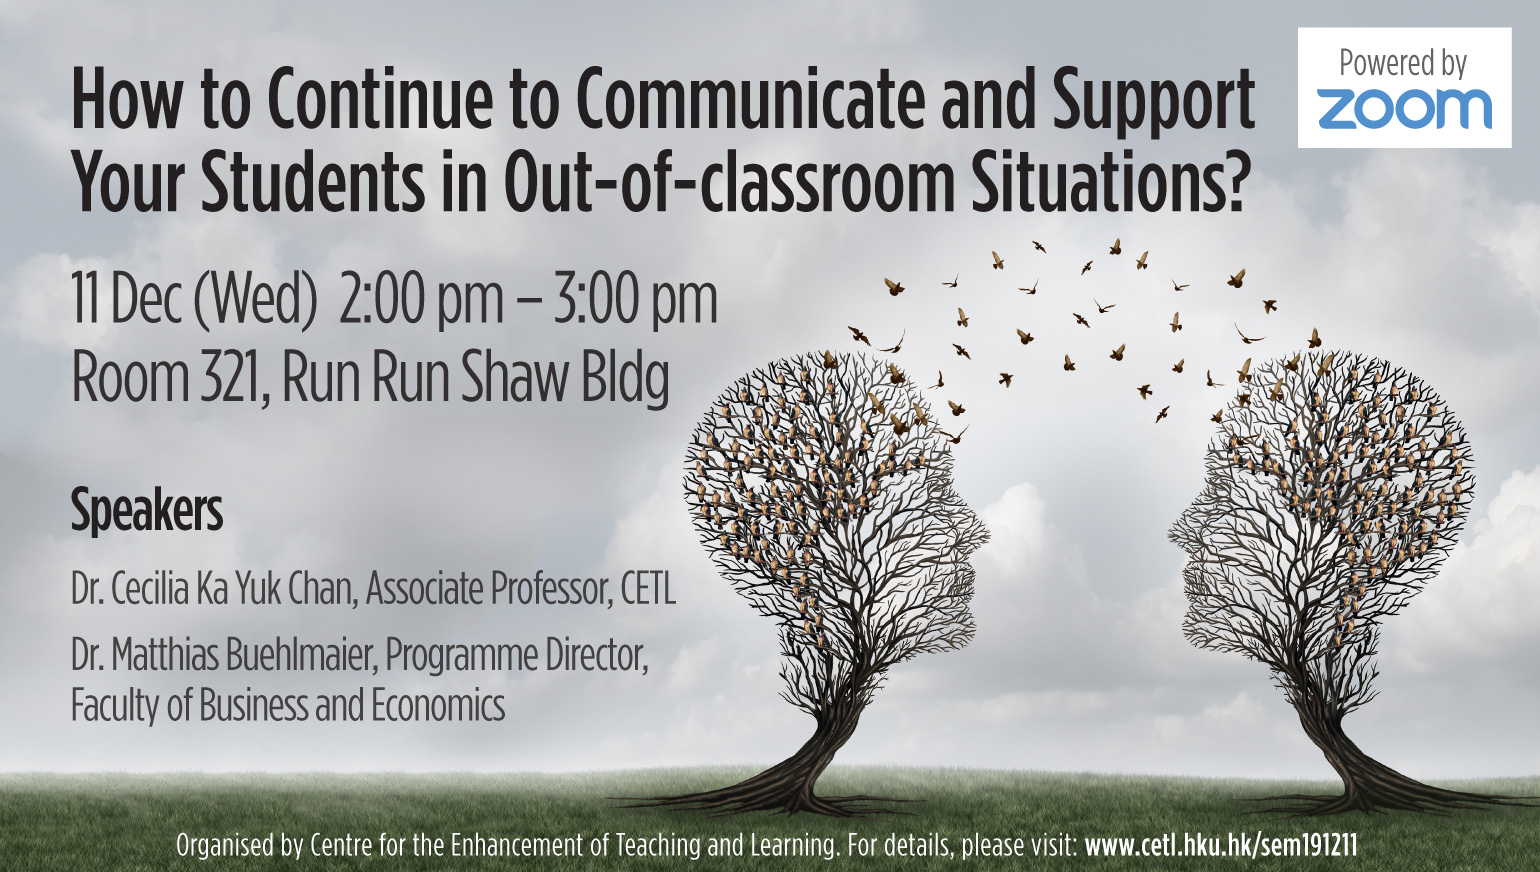 How to continue to communicate and support your students in out-of-classroom situations?